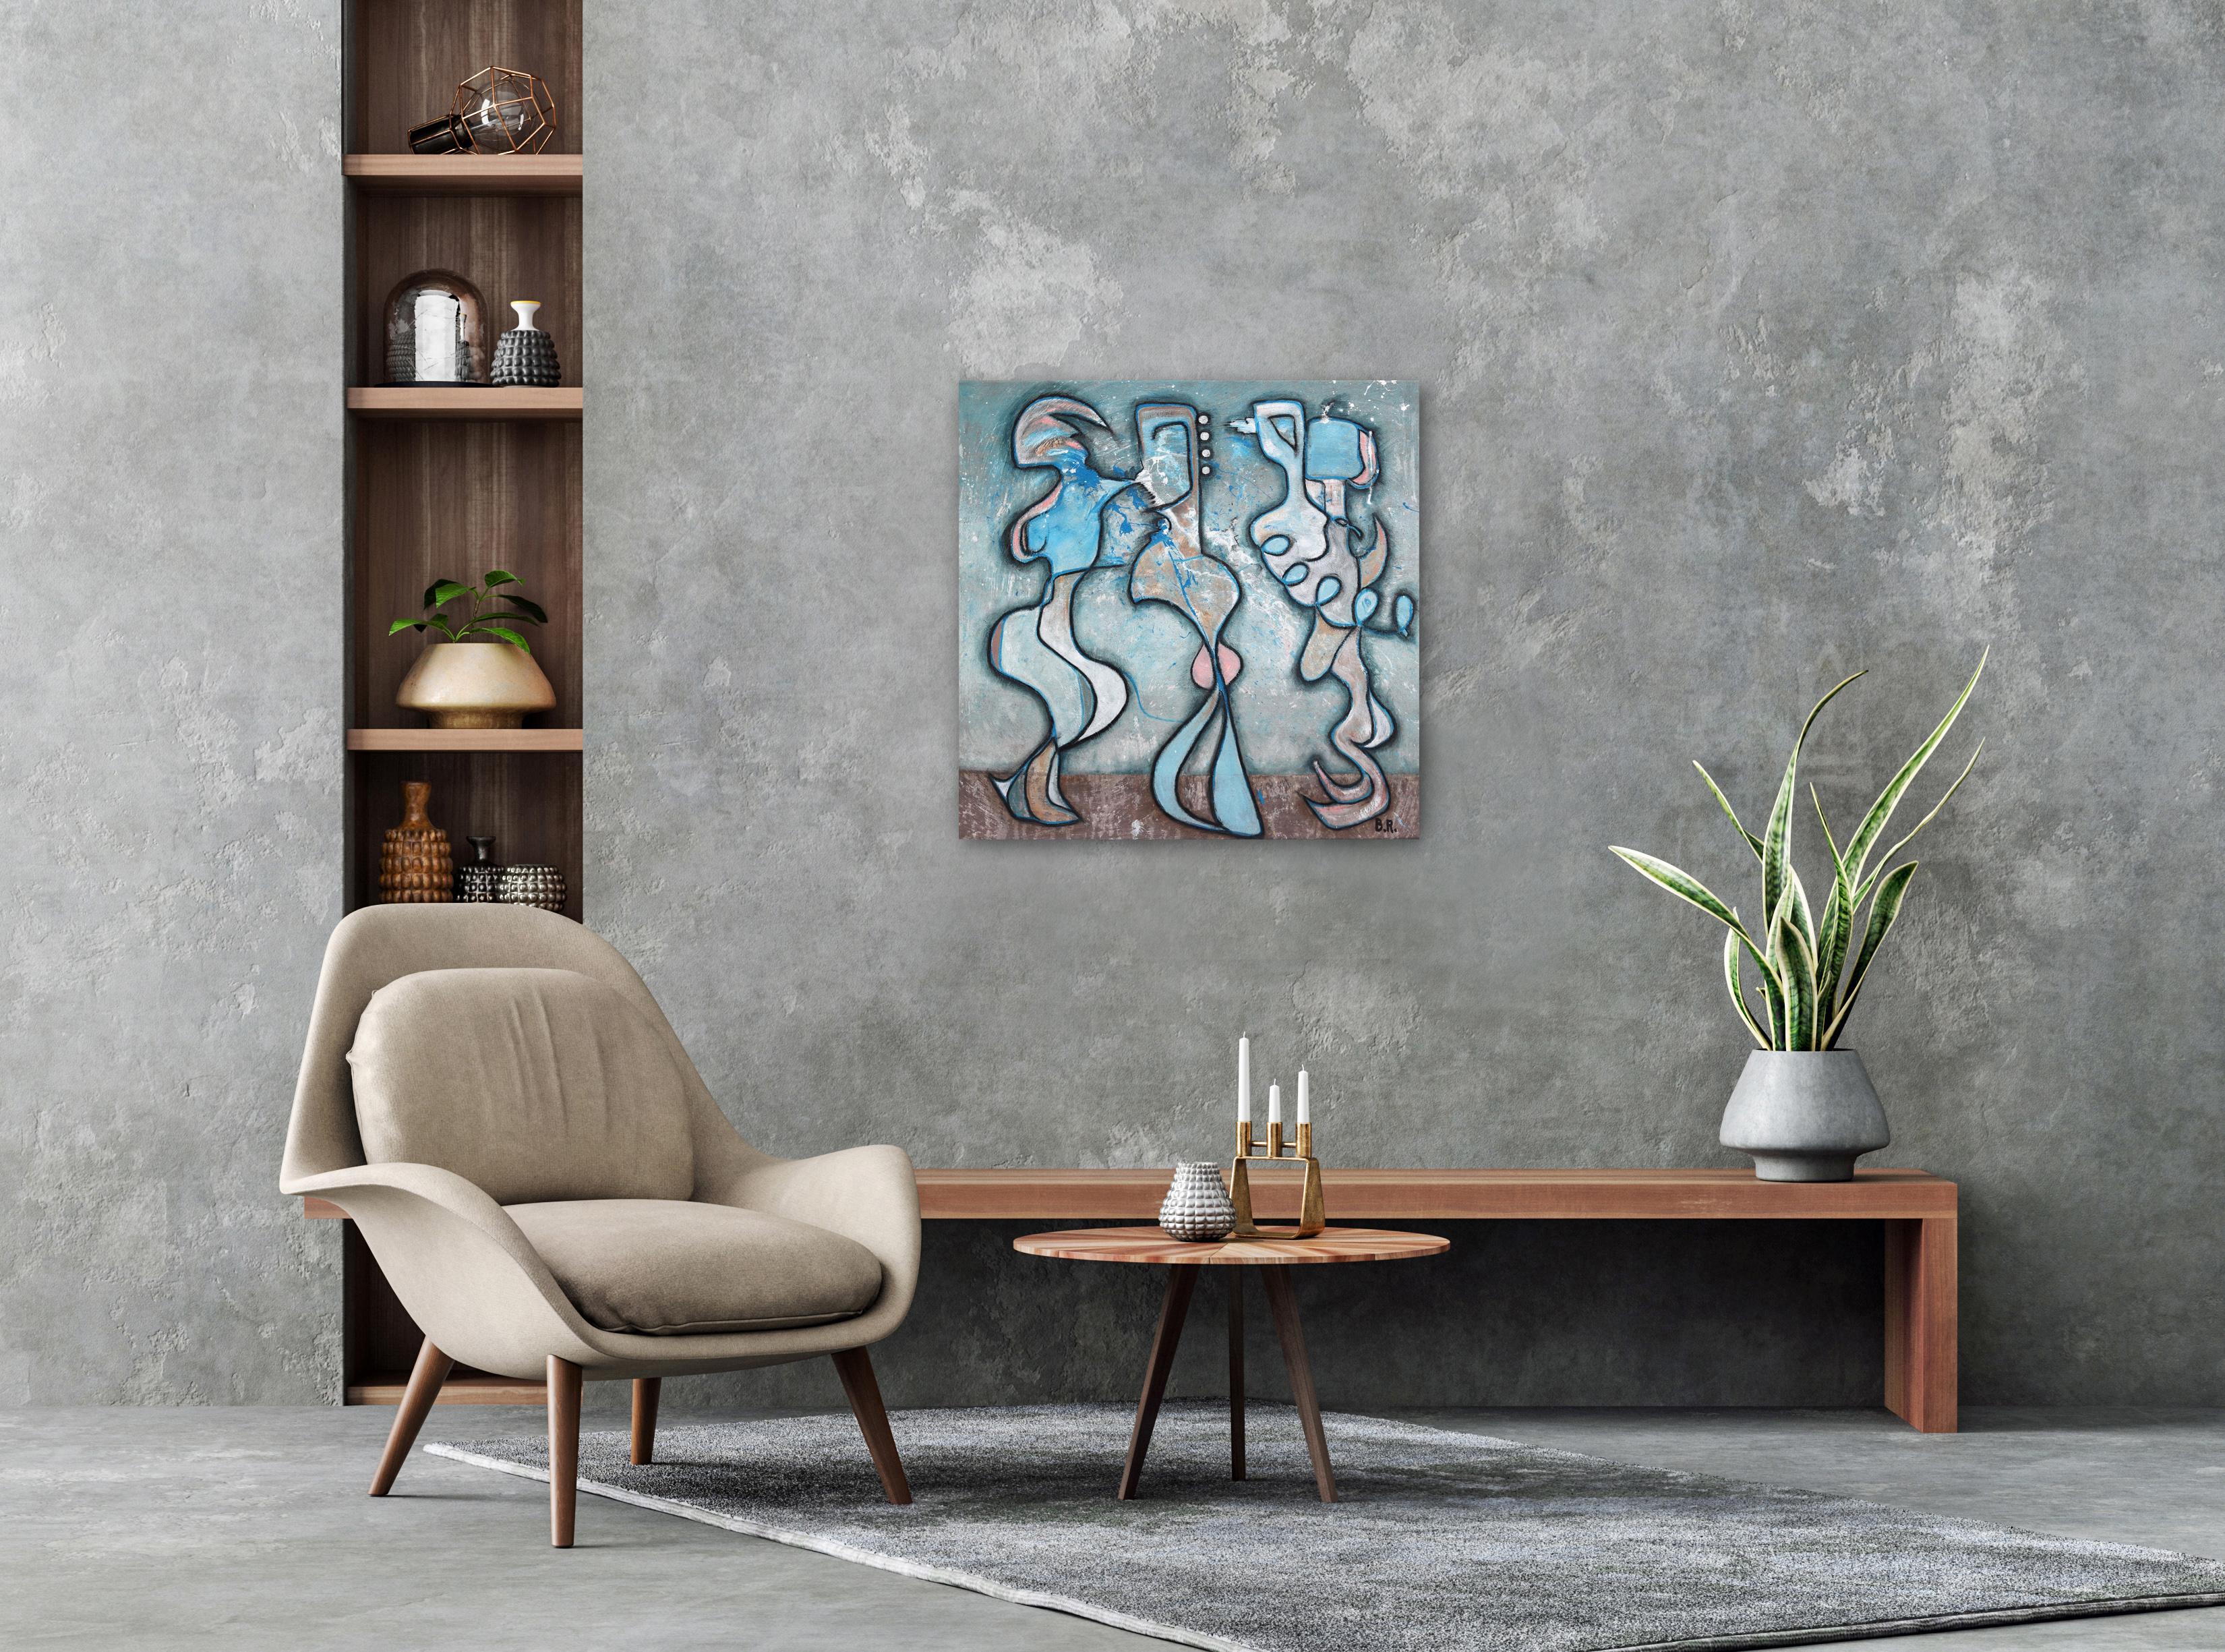 The paintings of Bruce Rubenstein seamlessly marry sophistication with affordability. His original art merges the creative attitudes of the two distinct art hot spots of New York and Los Angeles. Rubenstein's work has a rigid edge and strong